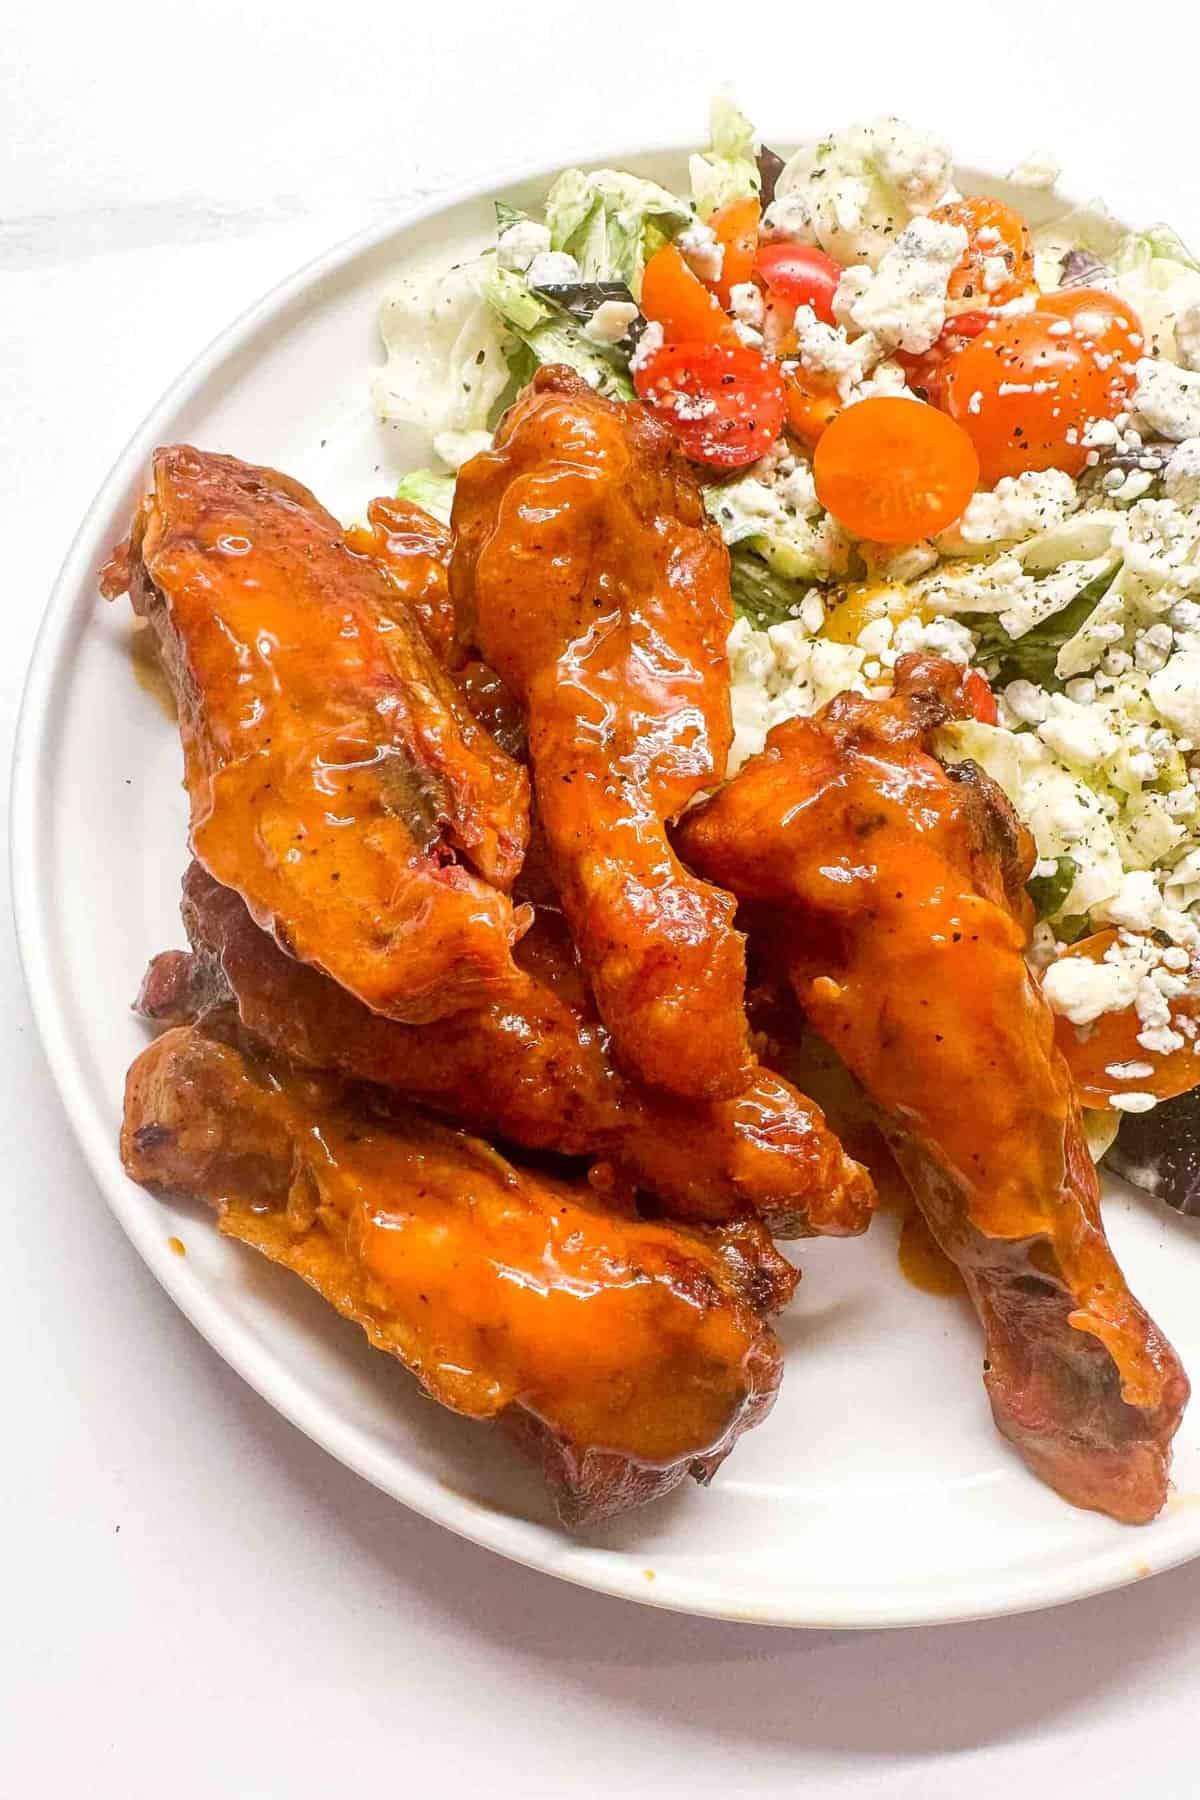 a close up of smoked buffalo wings on a plate with a side salad